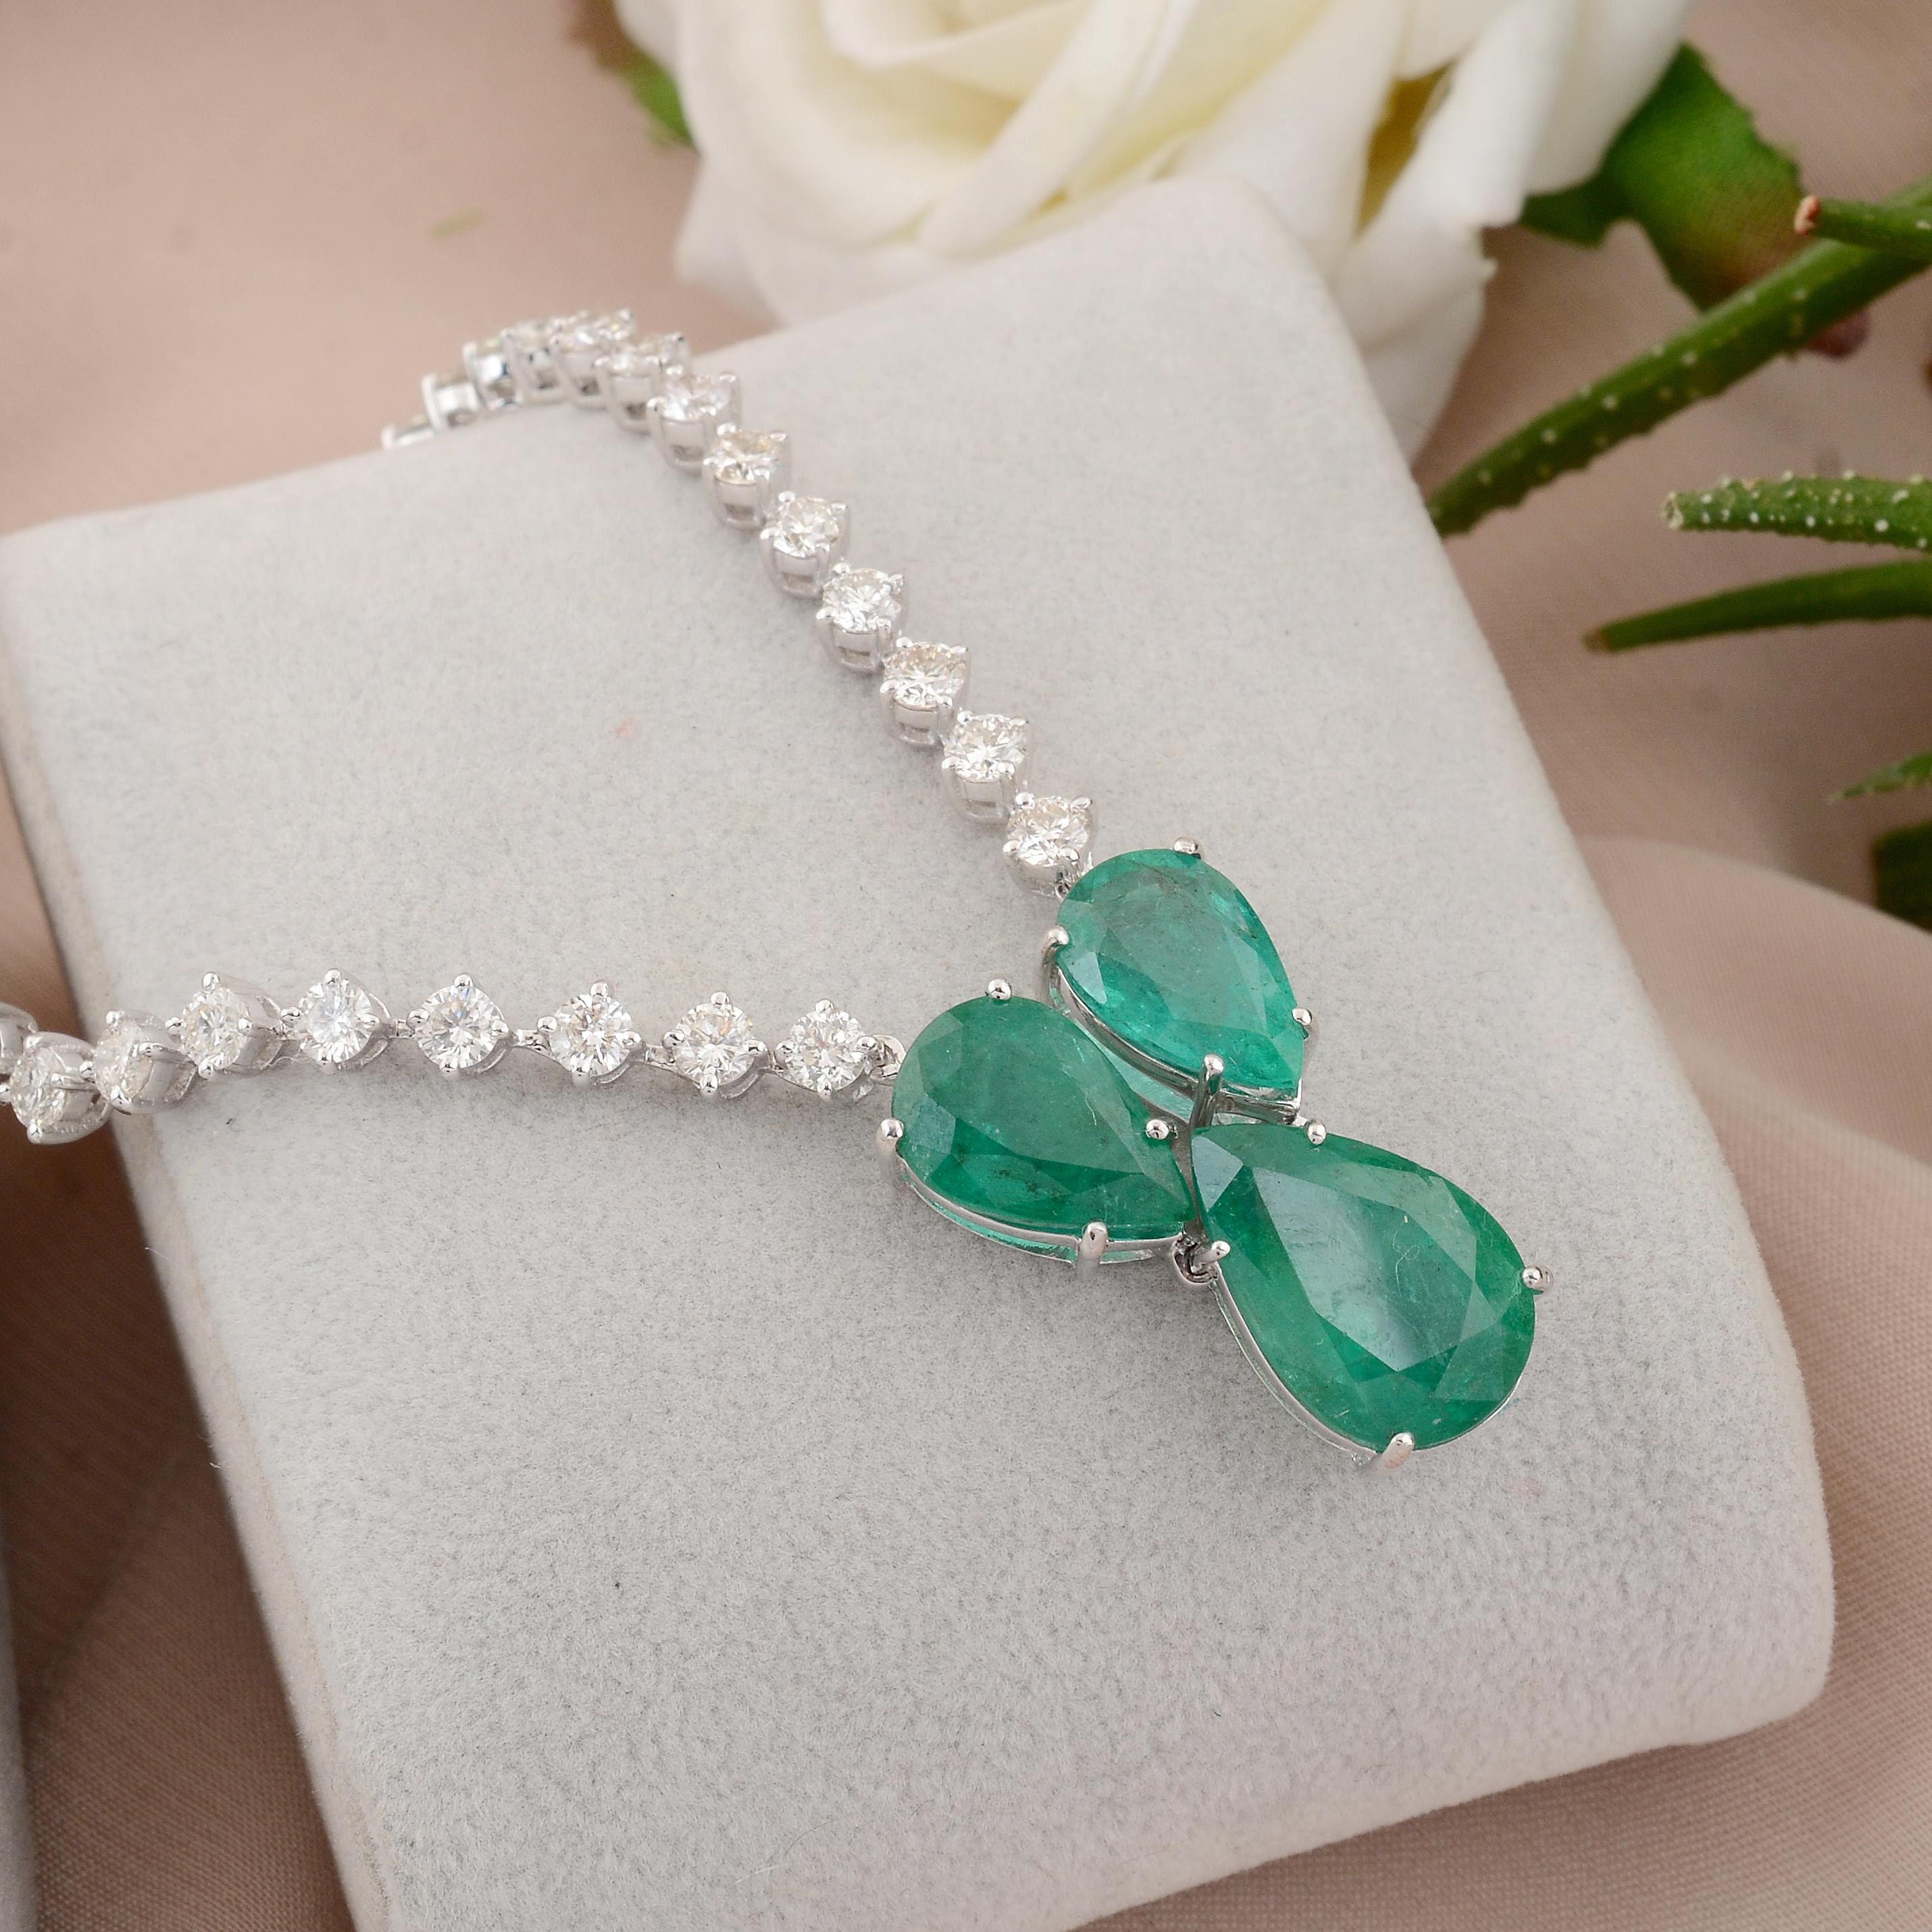 A charm necklace featuring a Zambian emerald gemstone and diamonds in 18 karat white gold is a stunning and elegant piece of fine jewelry. The necklace typically showcases a Zambian emerald as the central charm or pendant element, complemented by